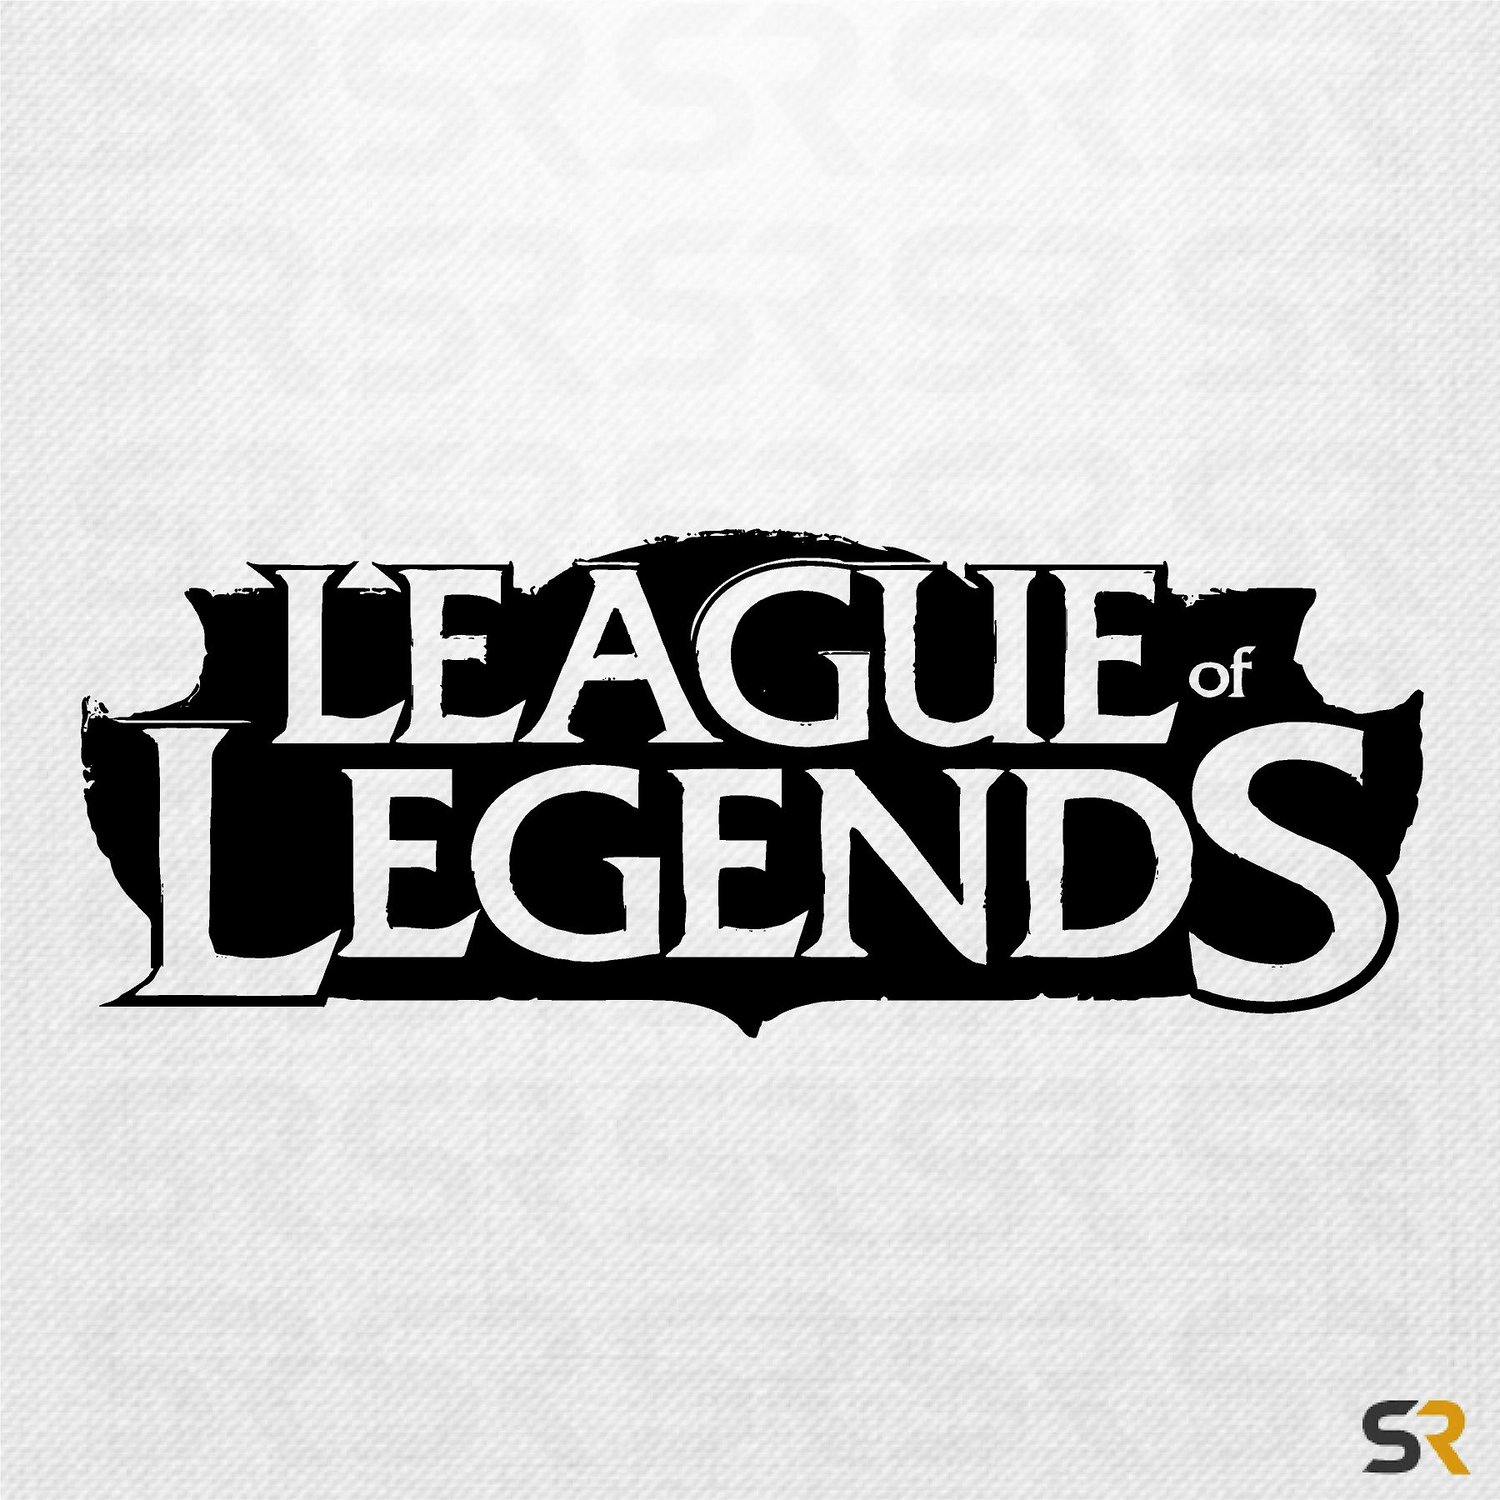 Image of League of Legends Decal, League of Legends Logo Decal, League of Legends Sticker, Vinyl Decals